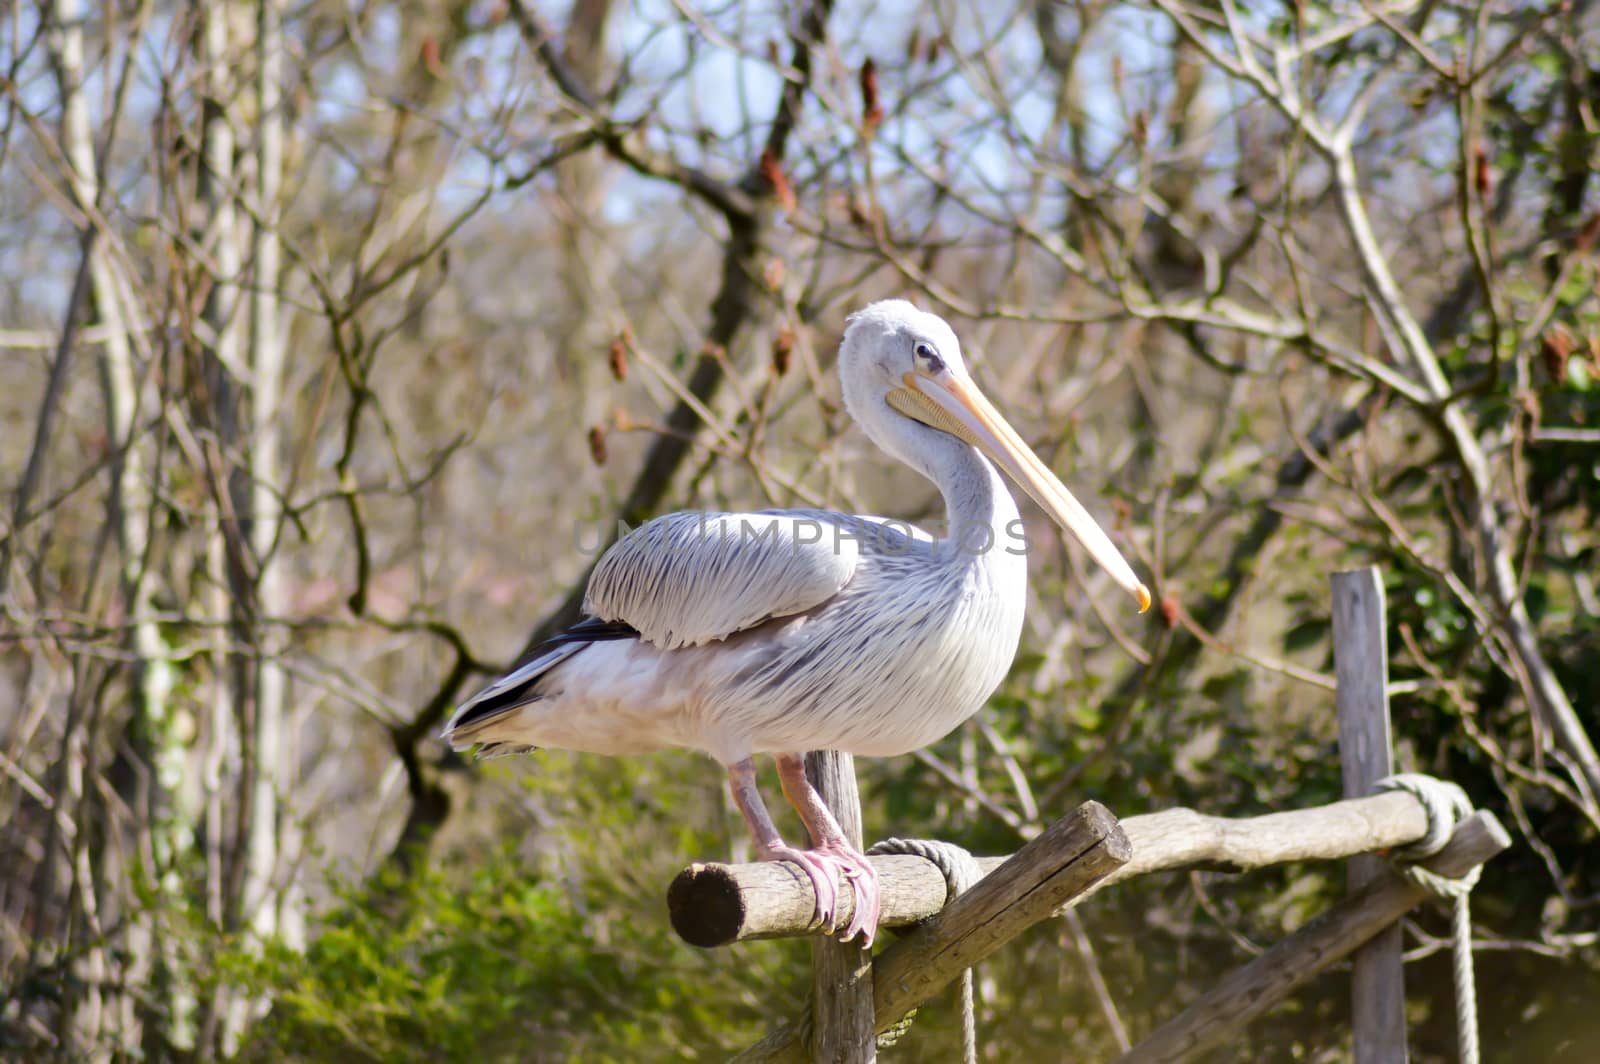 Pelican who makes his toilet on a wooden promontory in a zoo in france